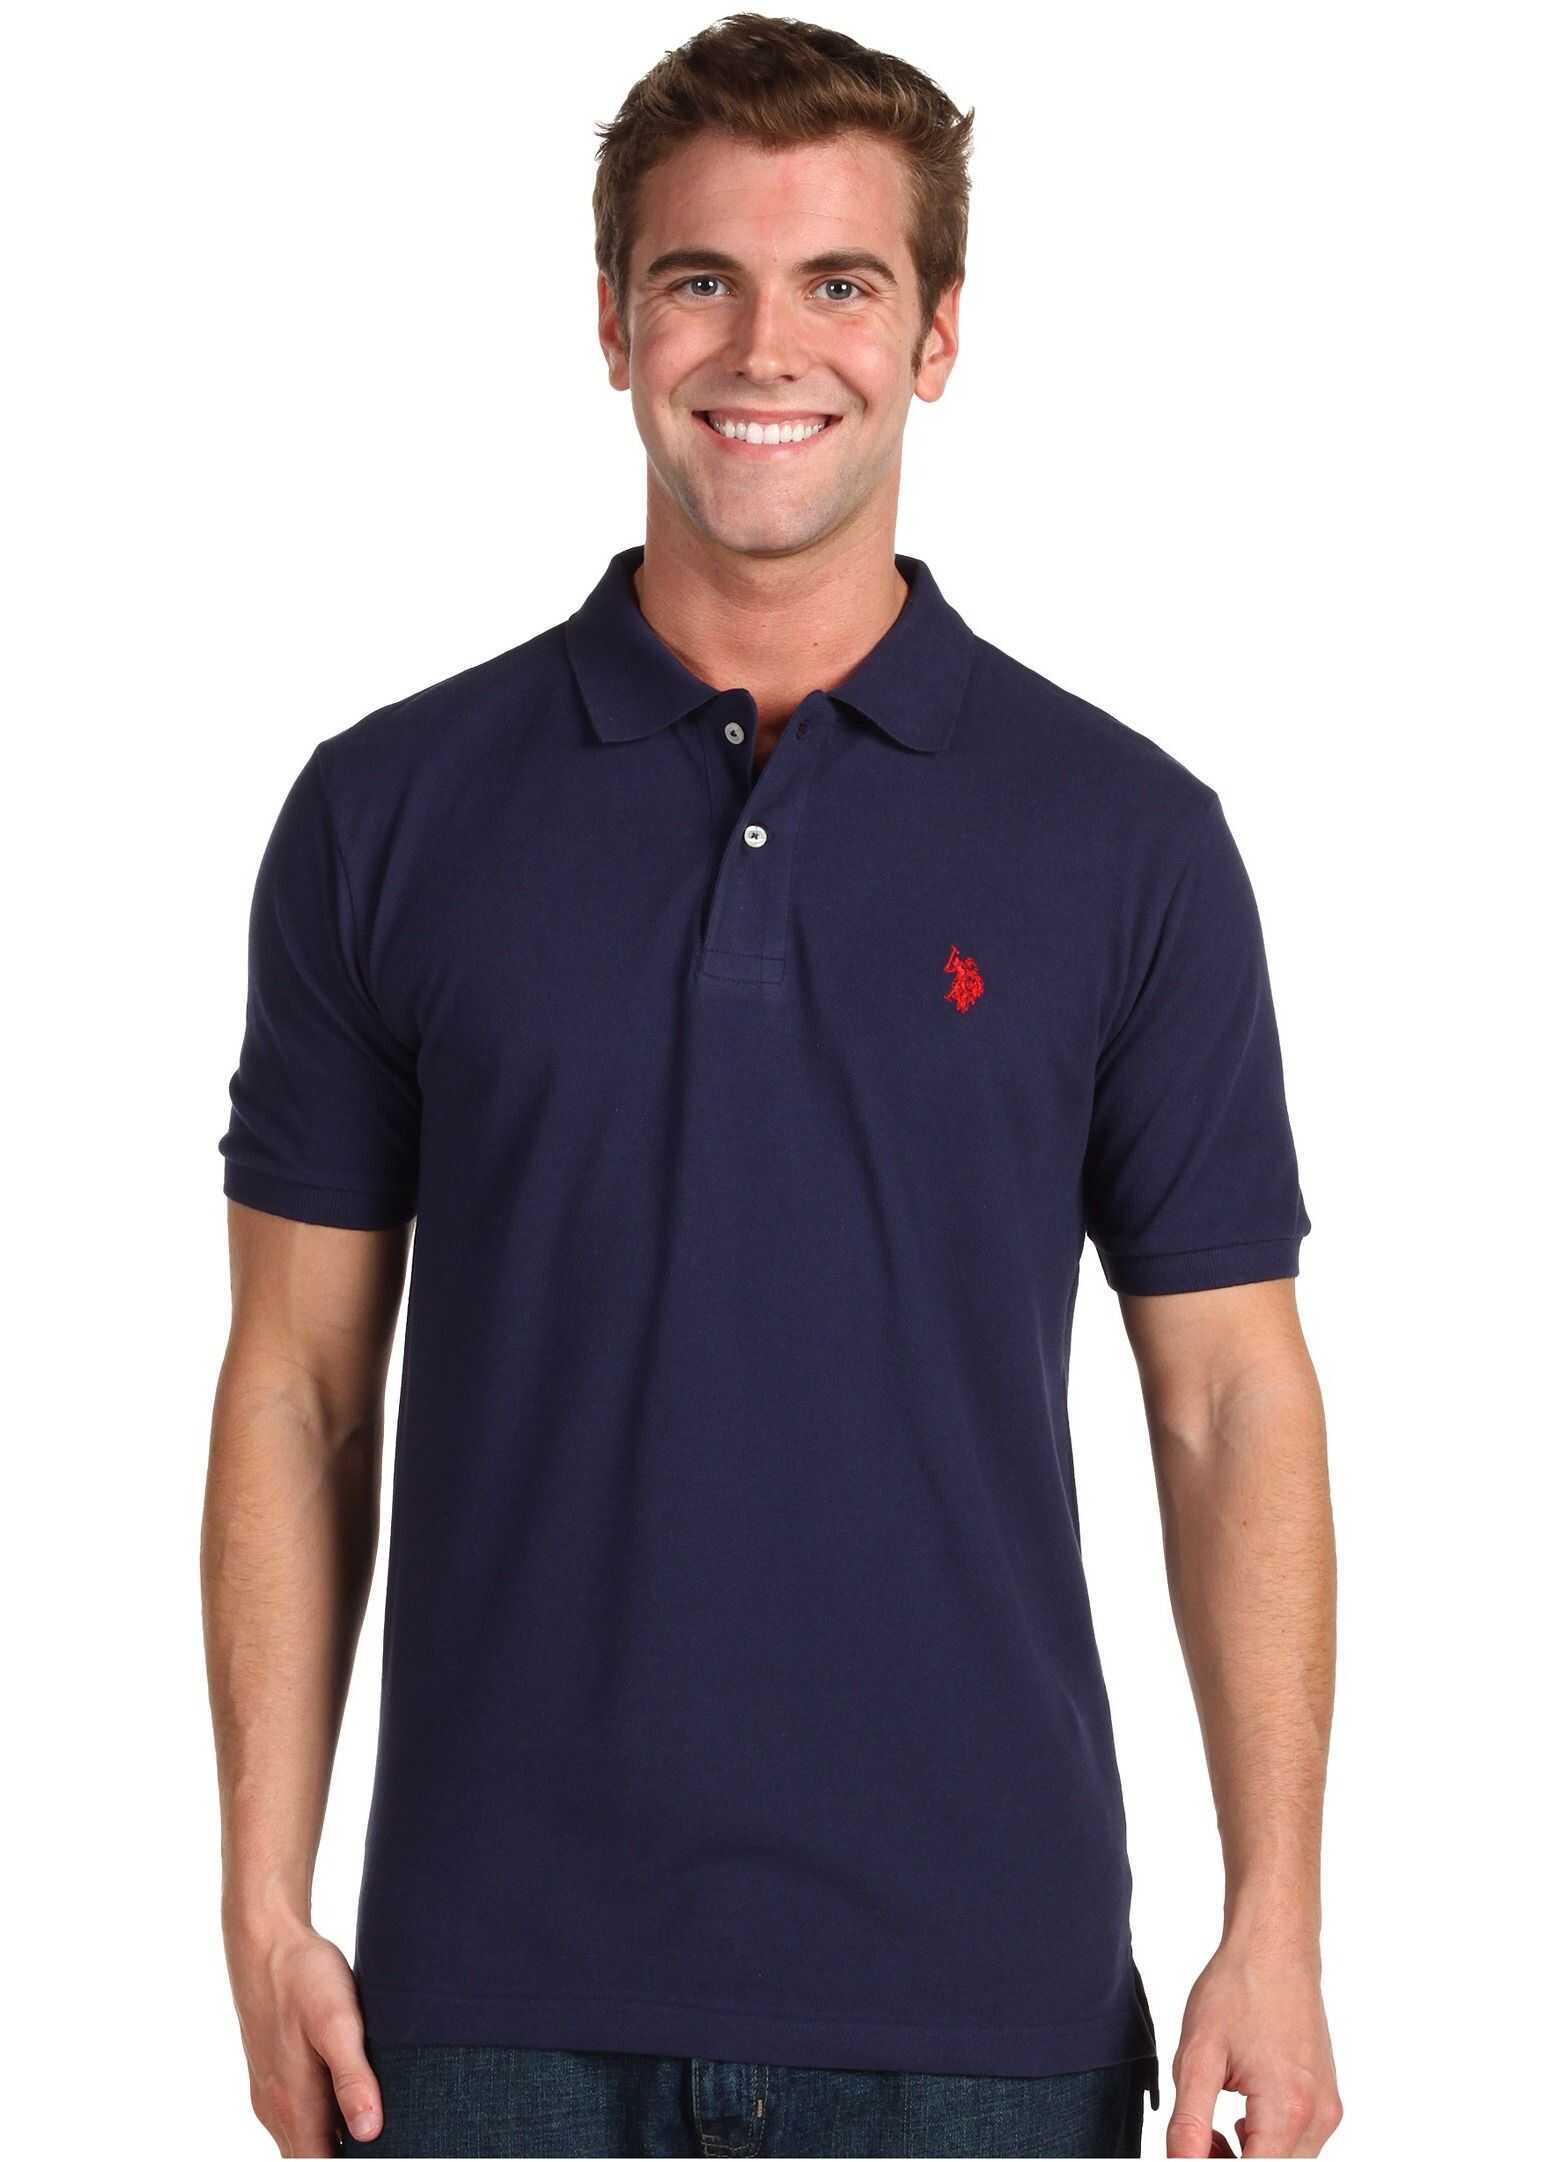 U.S. POLO ASSN. Solid Cotton Pique Polo with Small Pony Classic Navy